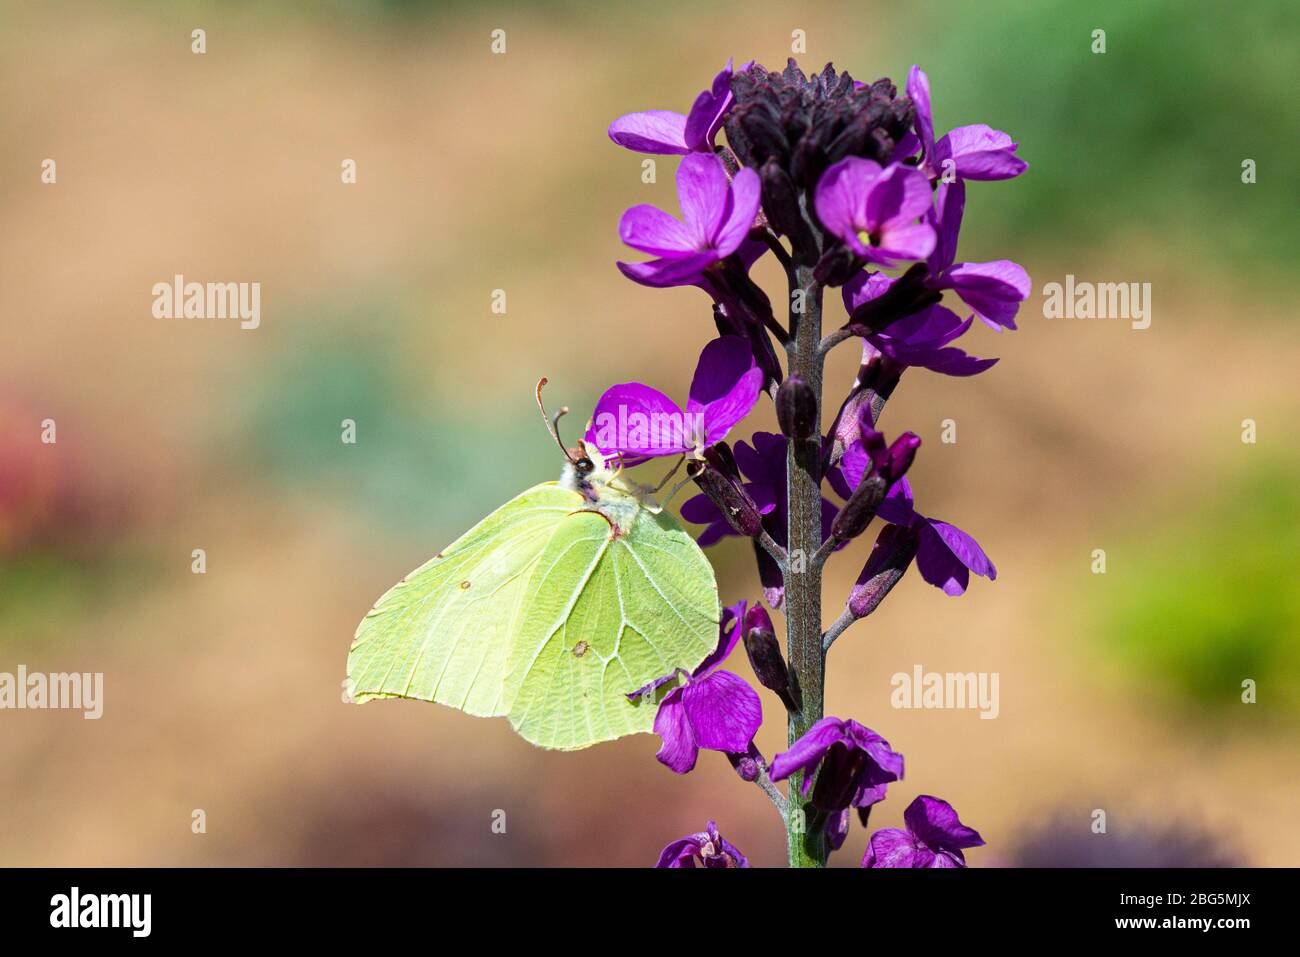 A common brimstone butterfly (Gonepteryx rhamni) on the flowers of a wallflower 'Bowles's Mauve' (Erysimum 'Bowles's Mauve') Stock Photo